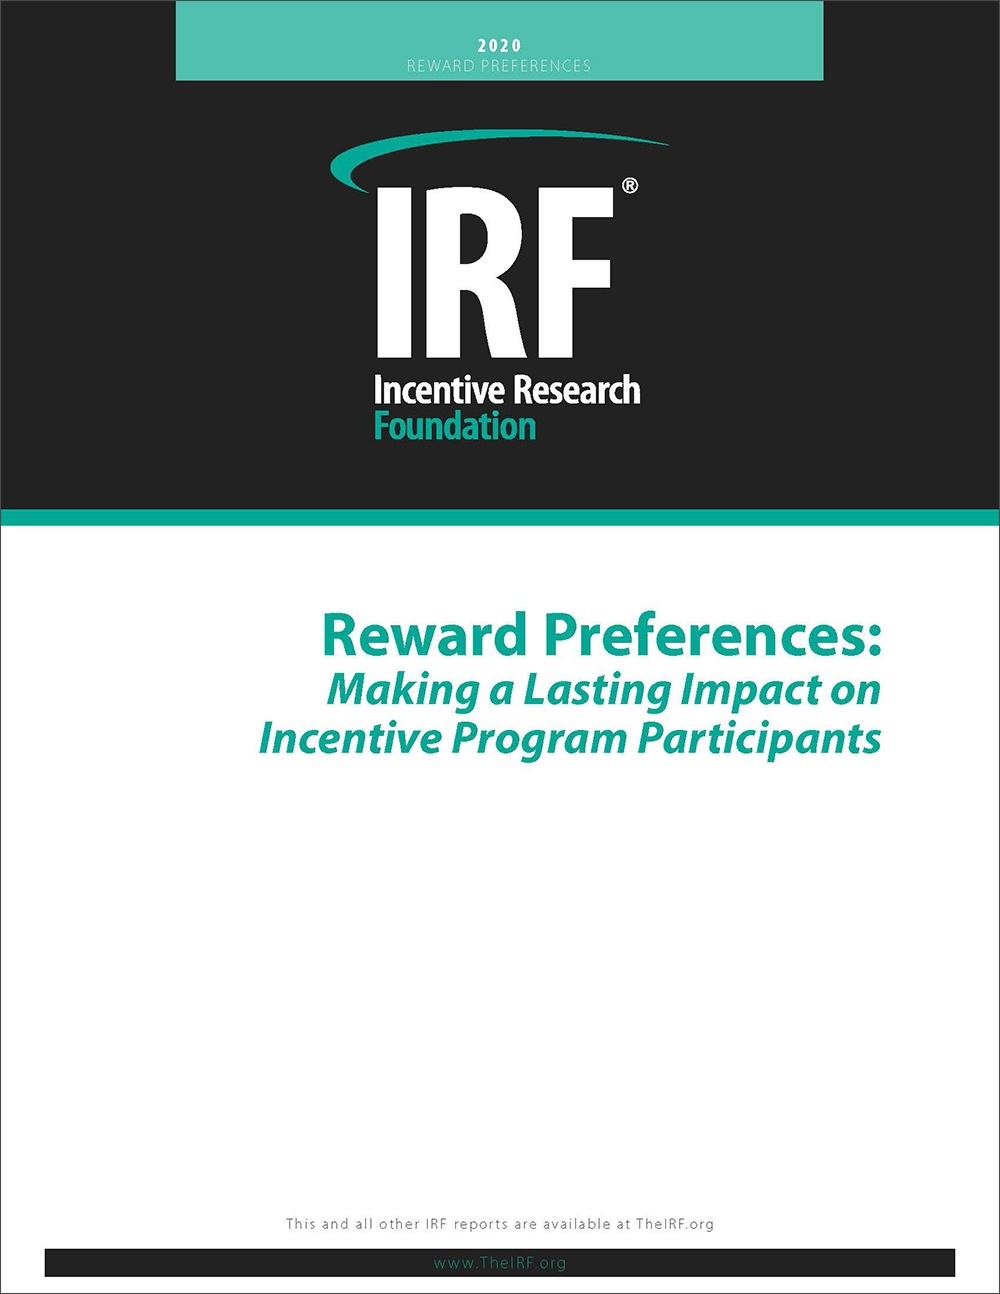 Incentive program reward preferences are examined in the latest report from the Incentive Research Foundation. Image shows the cover of the report, which is titled "Reward Preferences: Making a Lasting Impact on Incentive Program Participants."